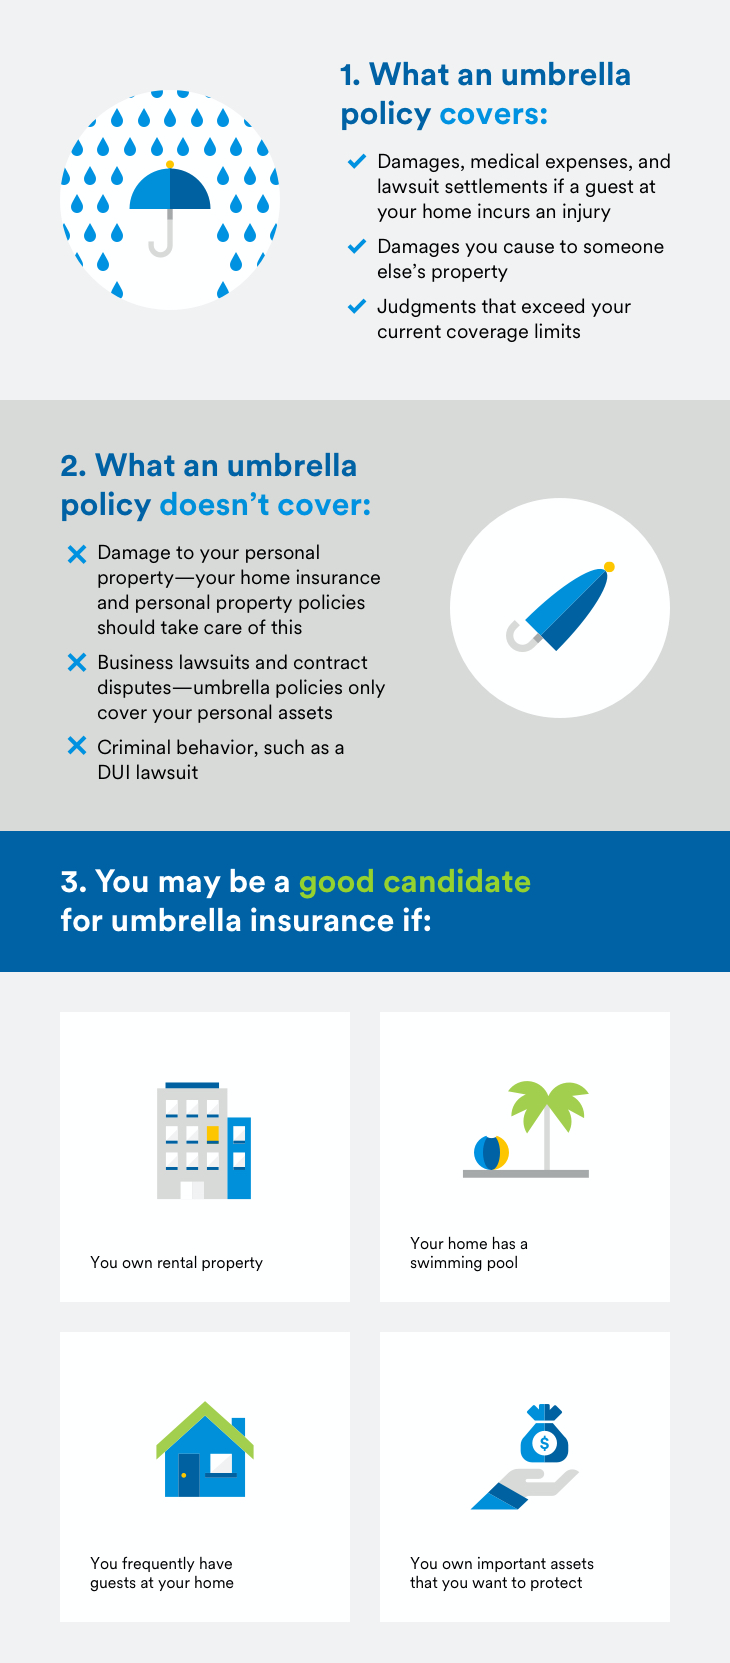 The Benefits of an Umbrella Policy